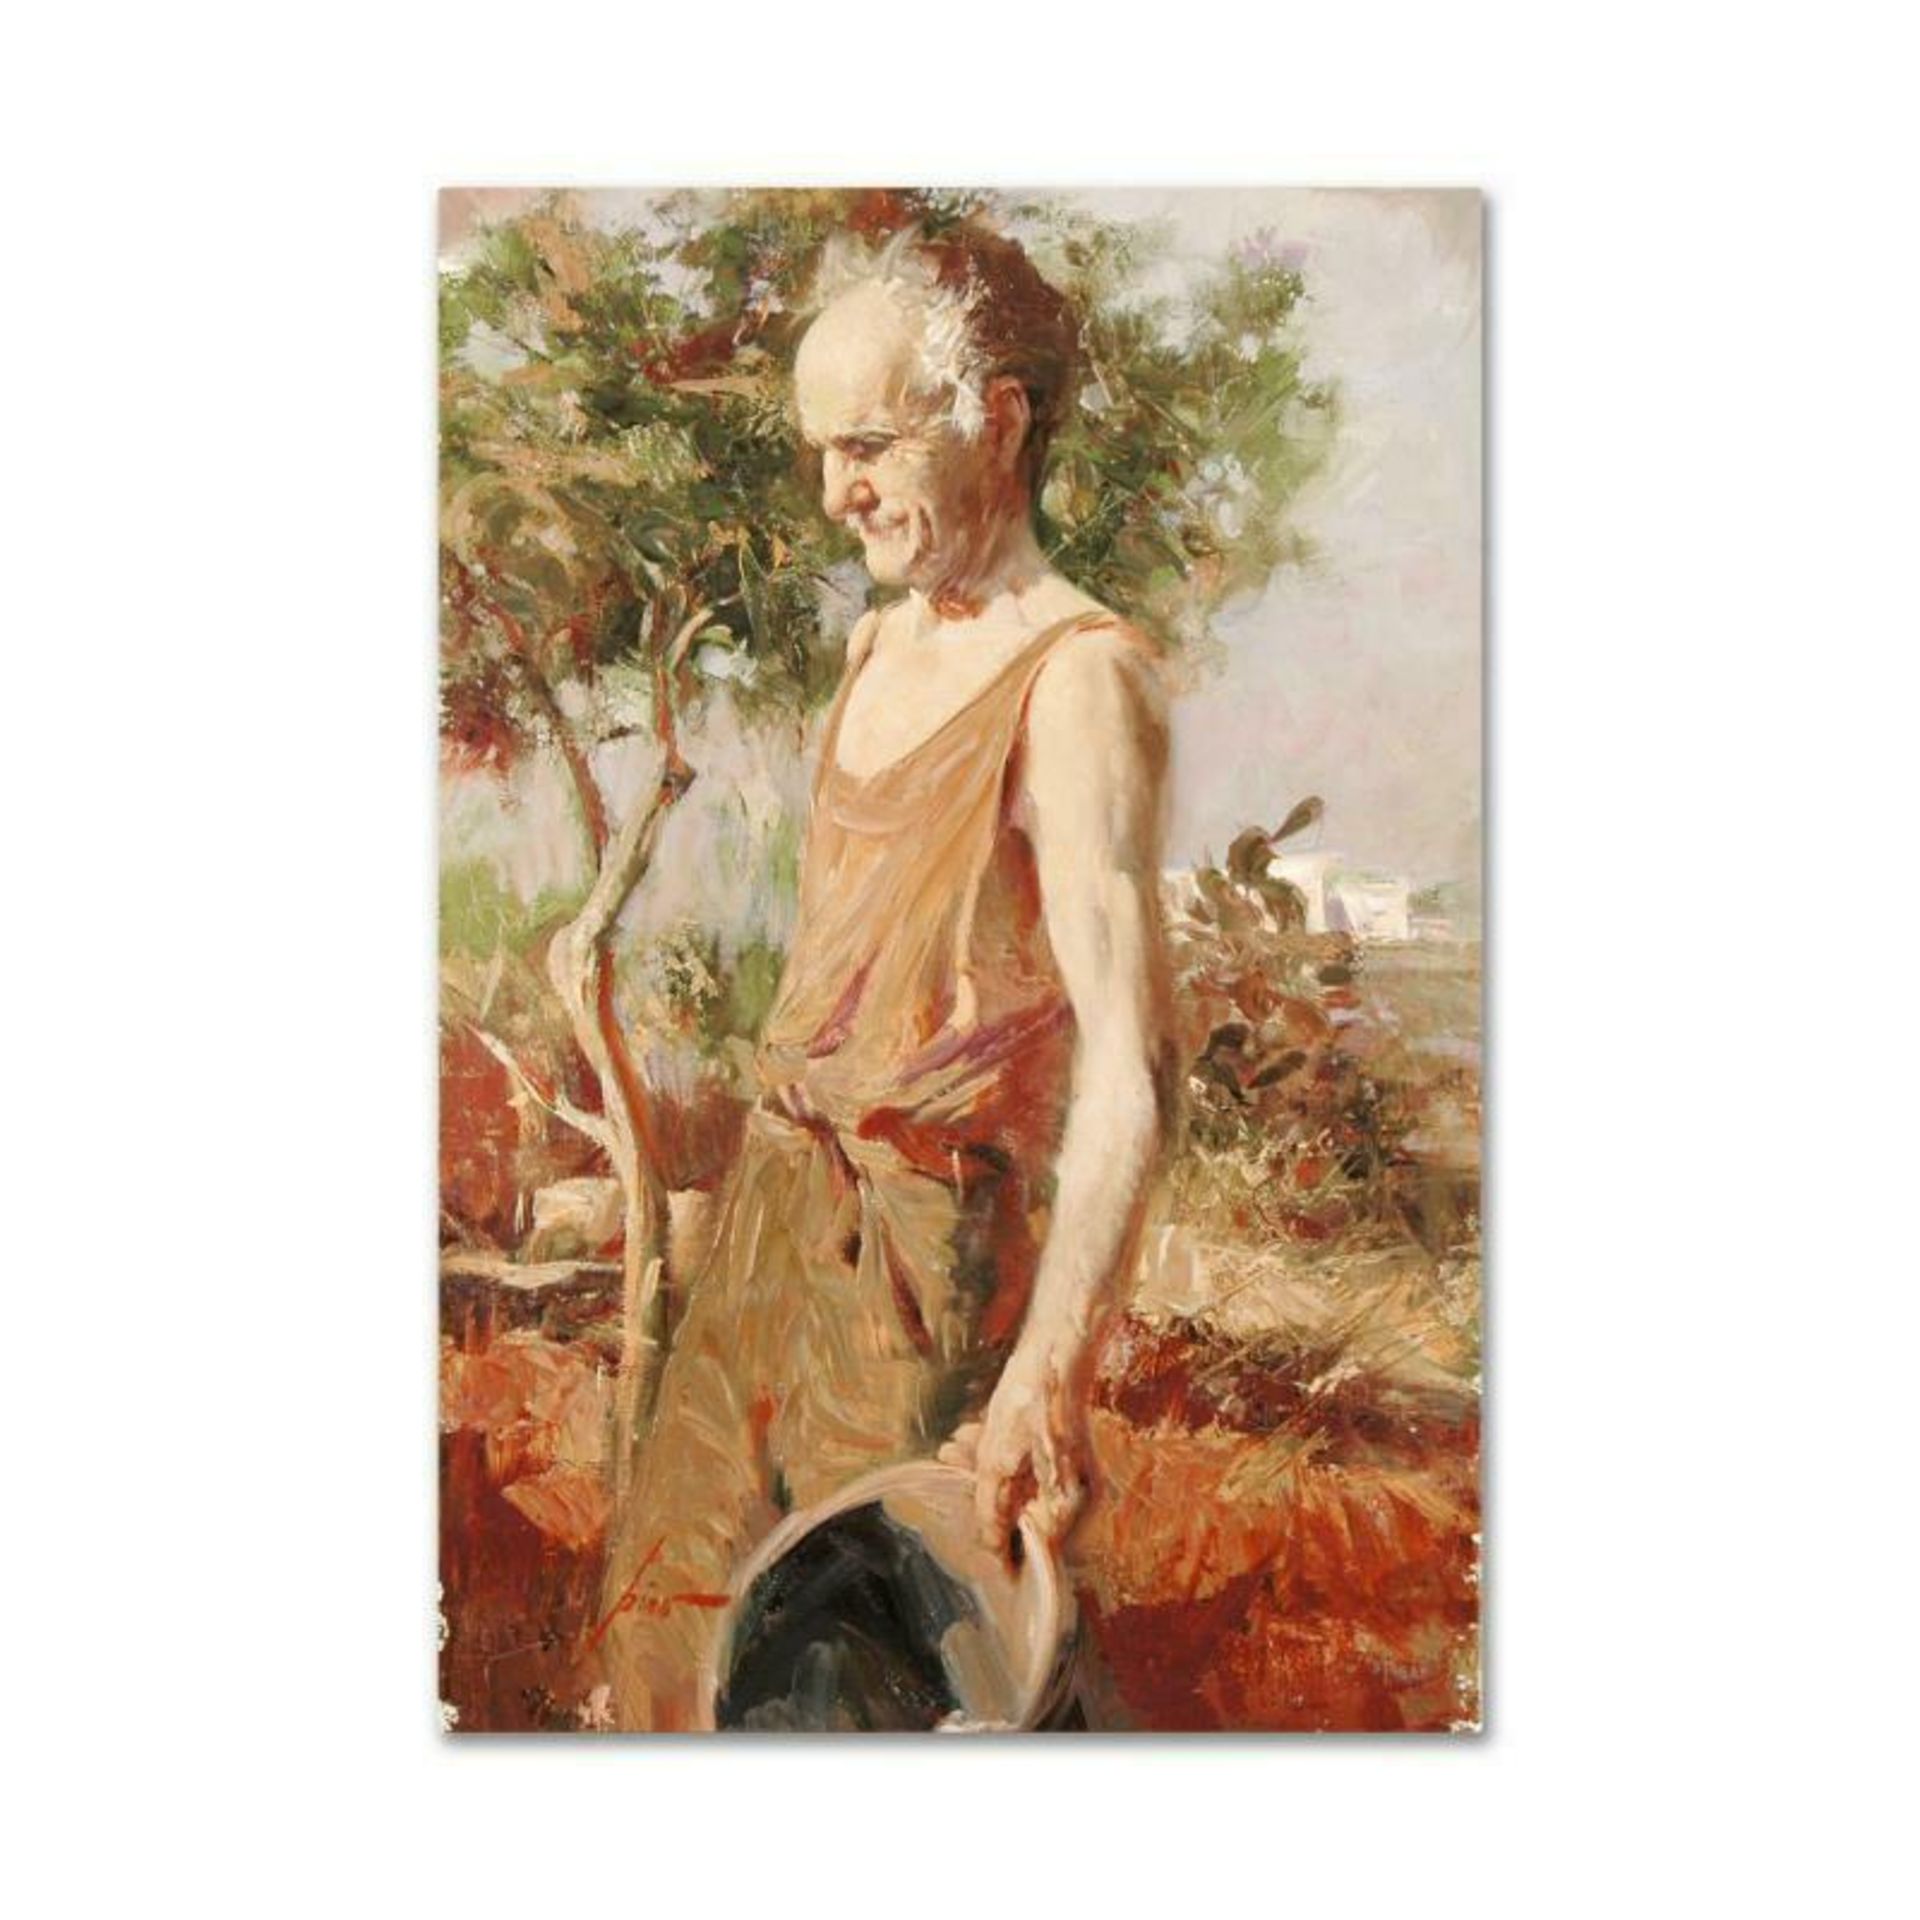 Pino (1939-2010), "Afternoon Chores" Artist Embellished Limited Edition on Canva